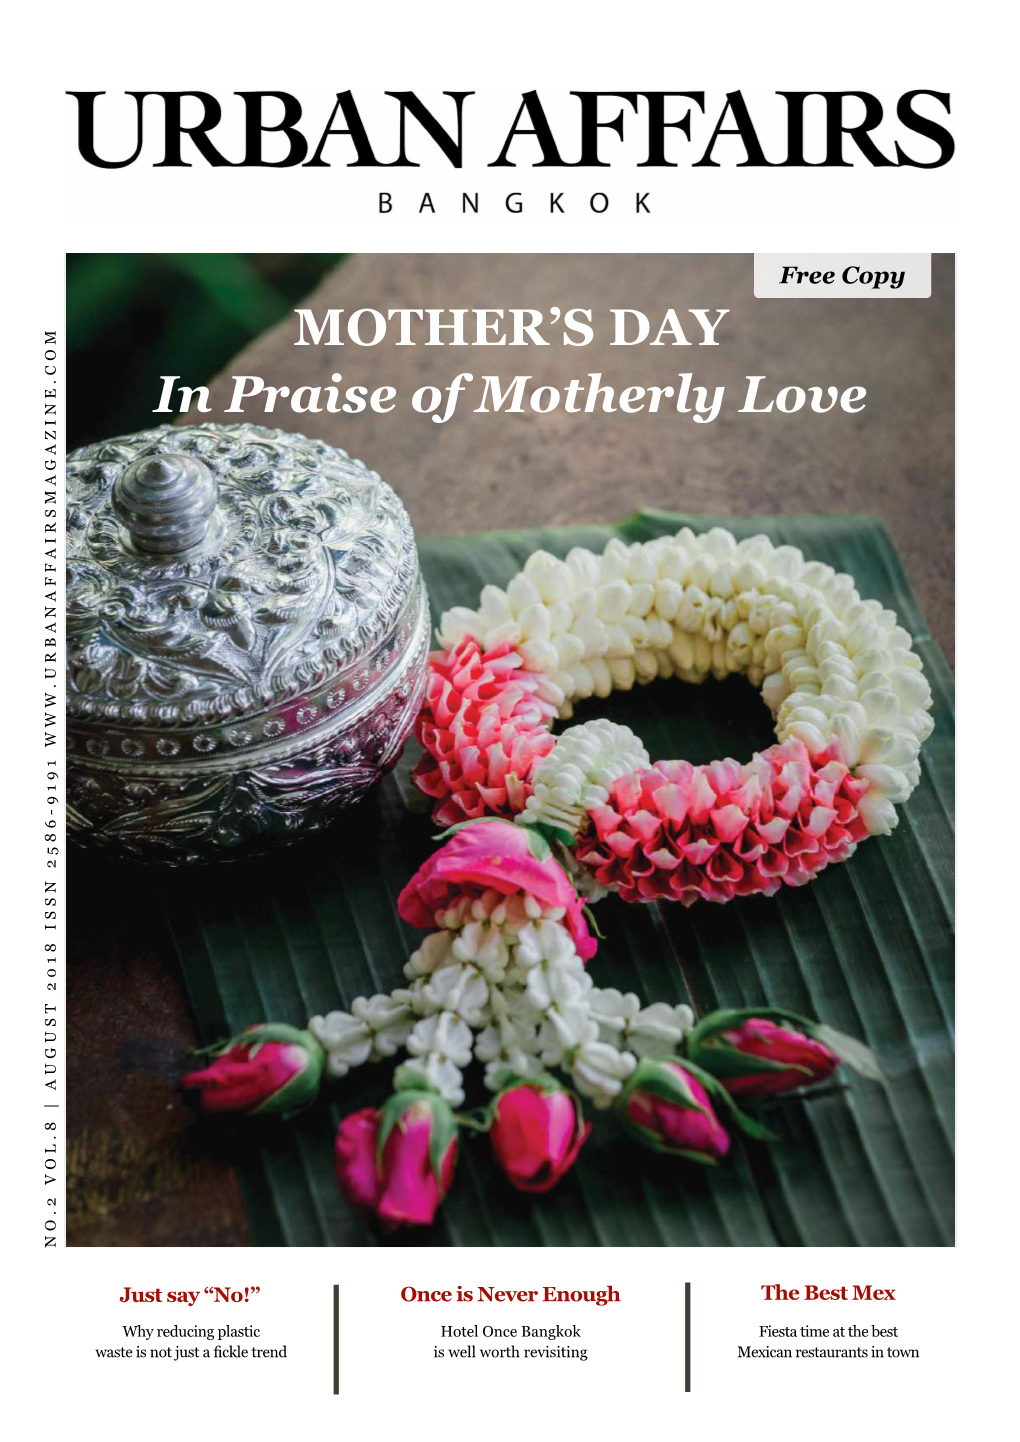 MOTHER's DAY in Praise of Motherly Love